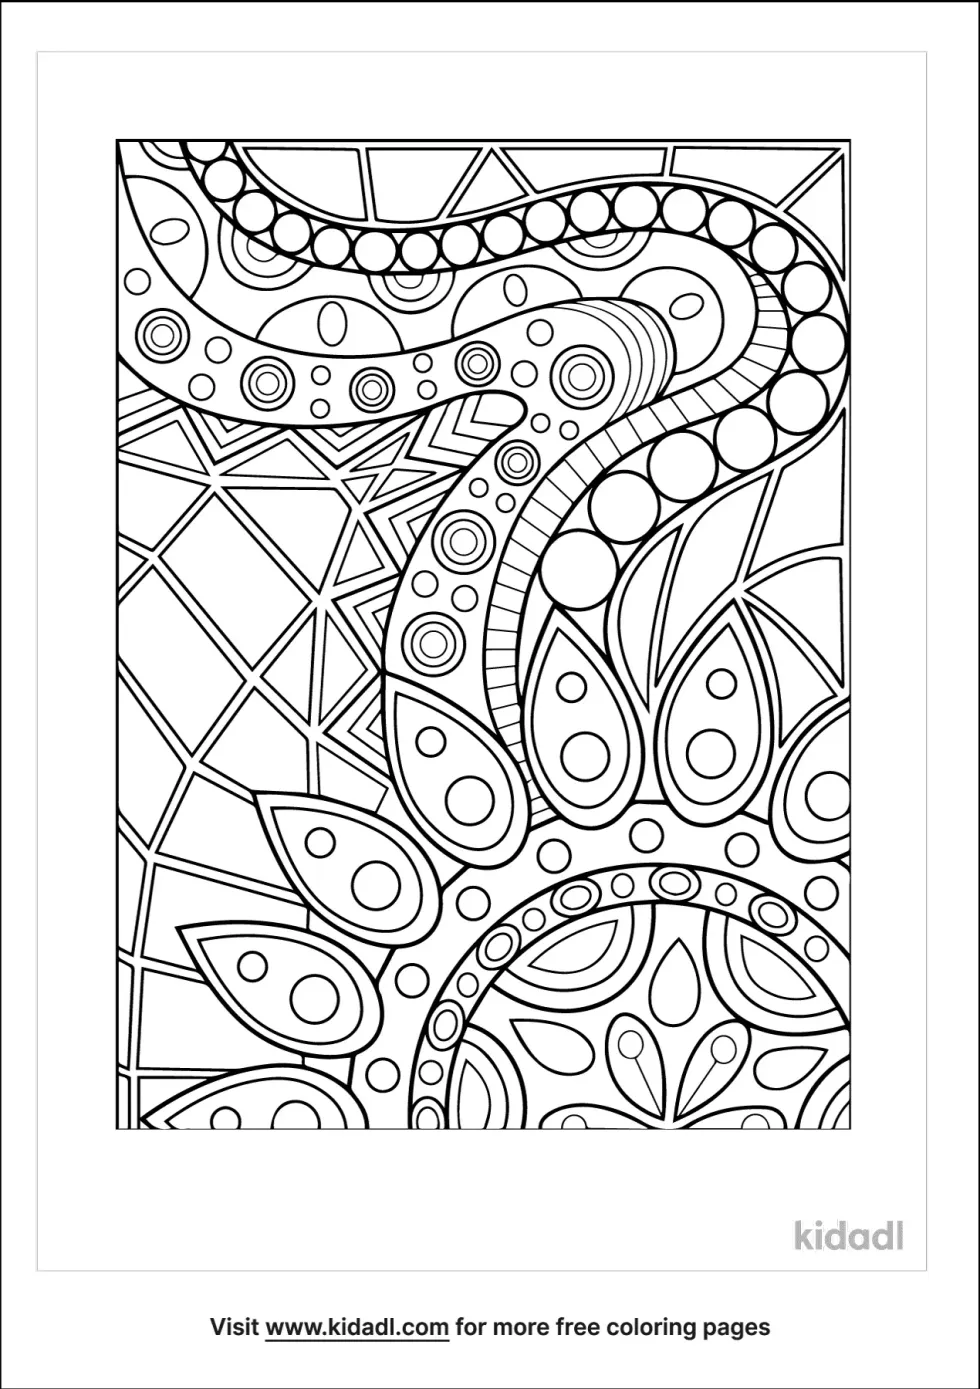 Chameleon Pens Coloring Page